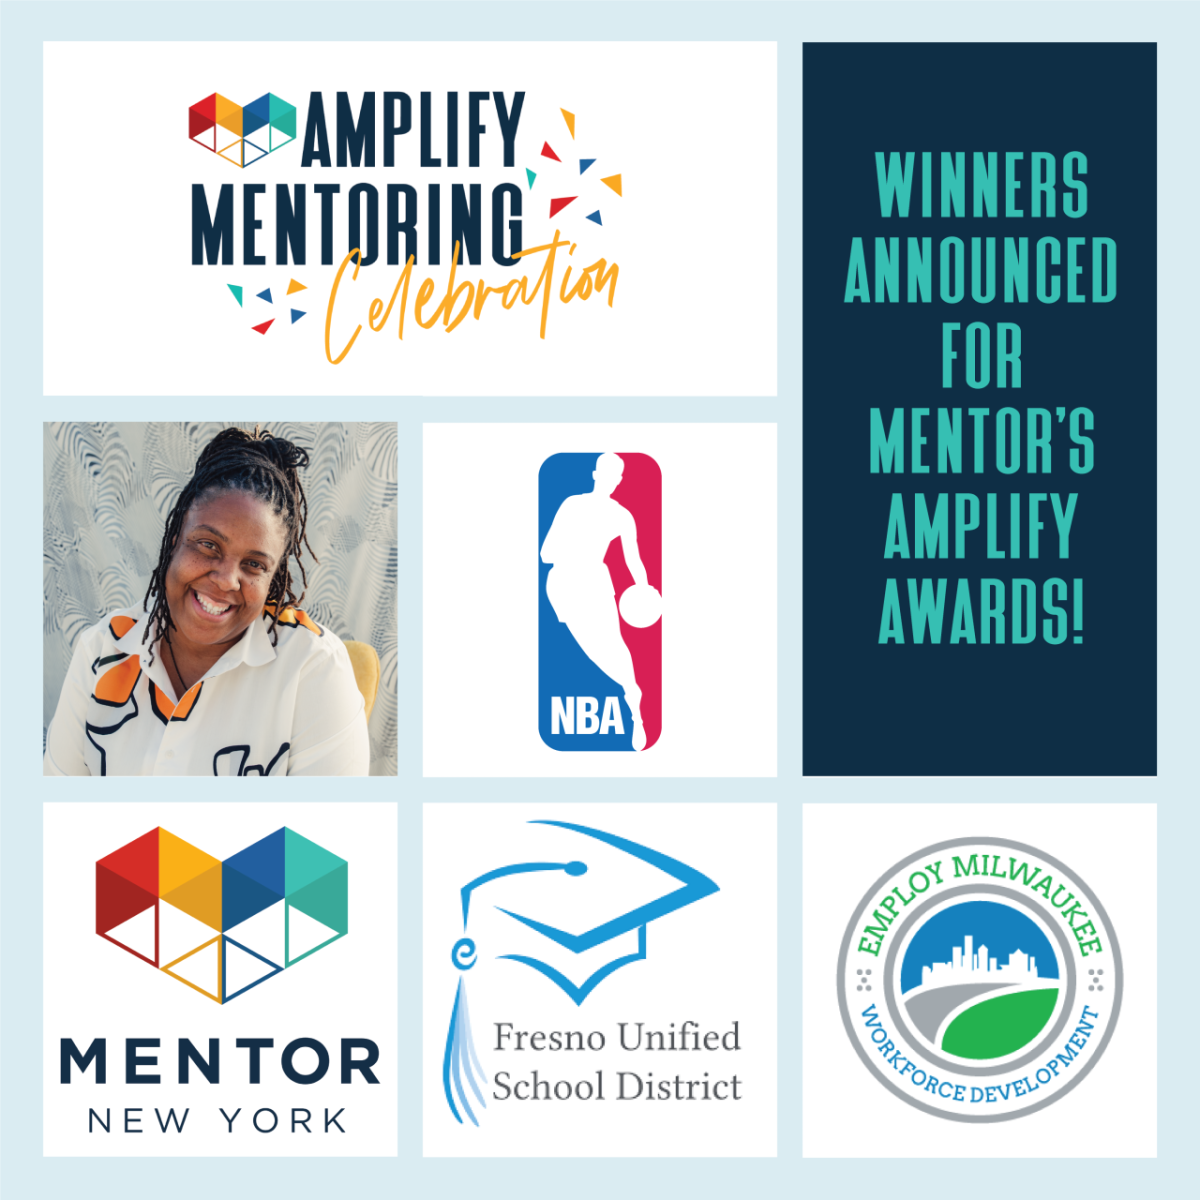 The words Amplify Mentoring Celebration, Winners Announced for Mentor's Amplify Awards with a photo of Torie-Weiston Serdan, and logos from MENTOR New York, Fresno Unified School District, and Employ Milwaukee